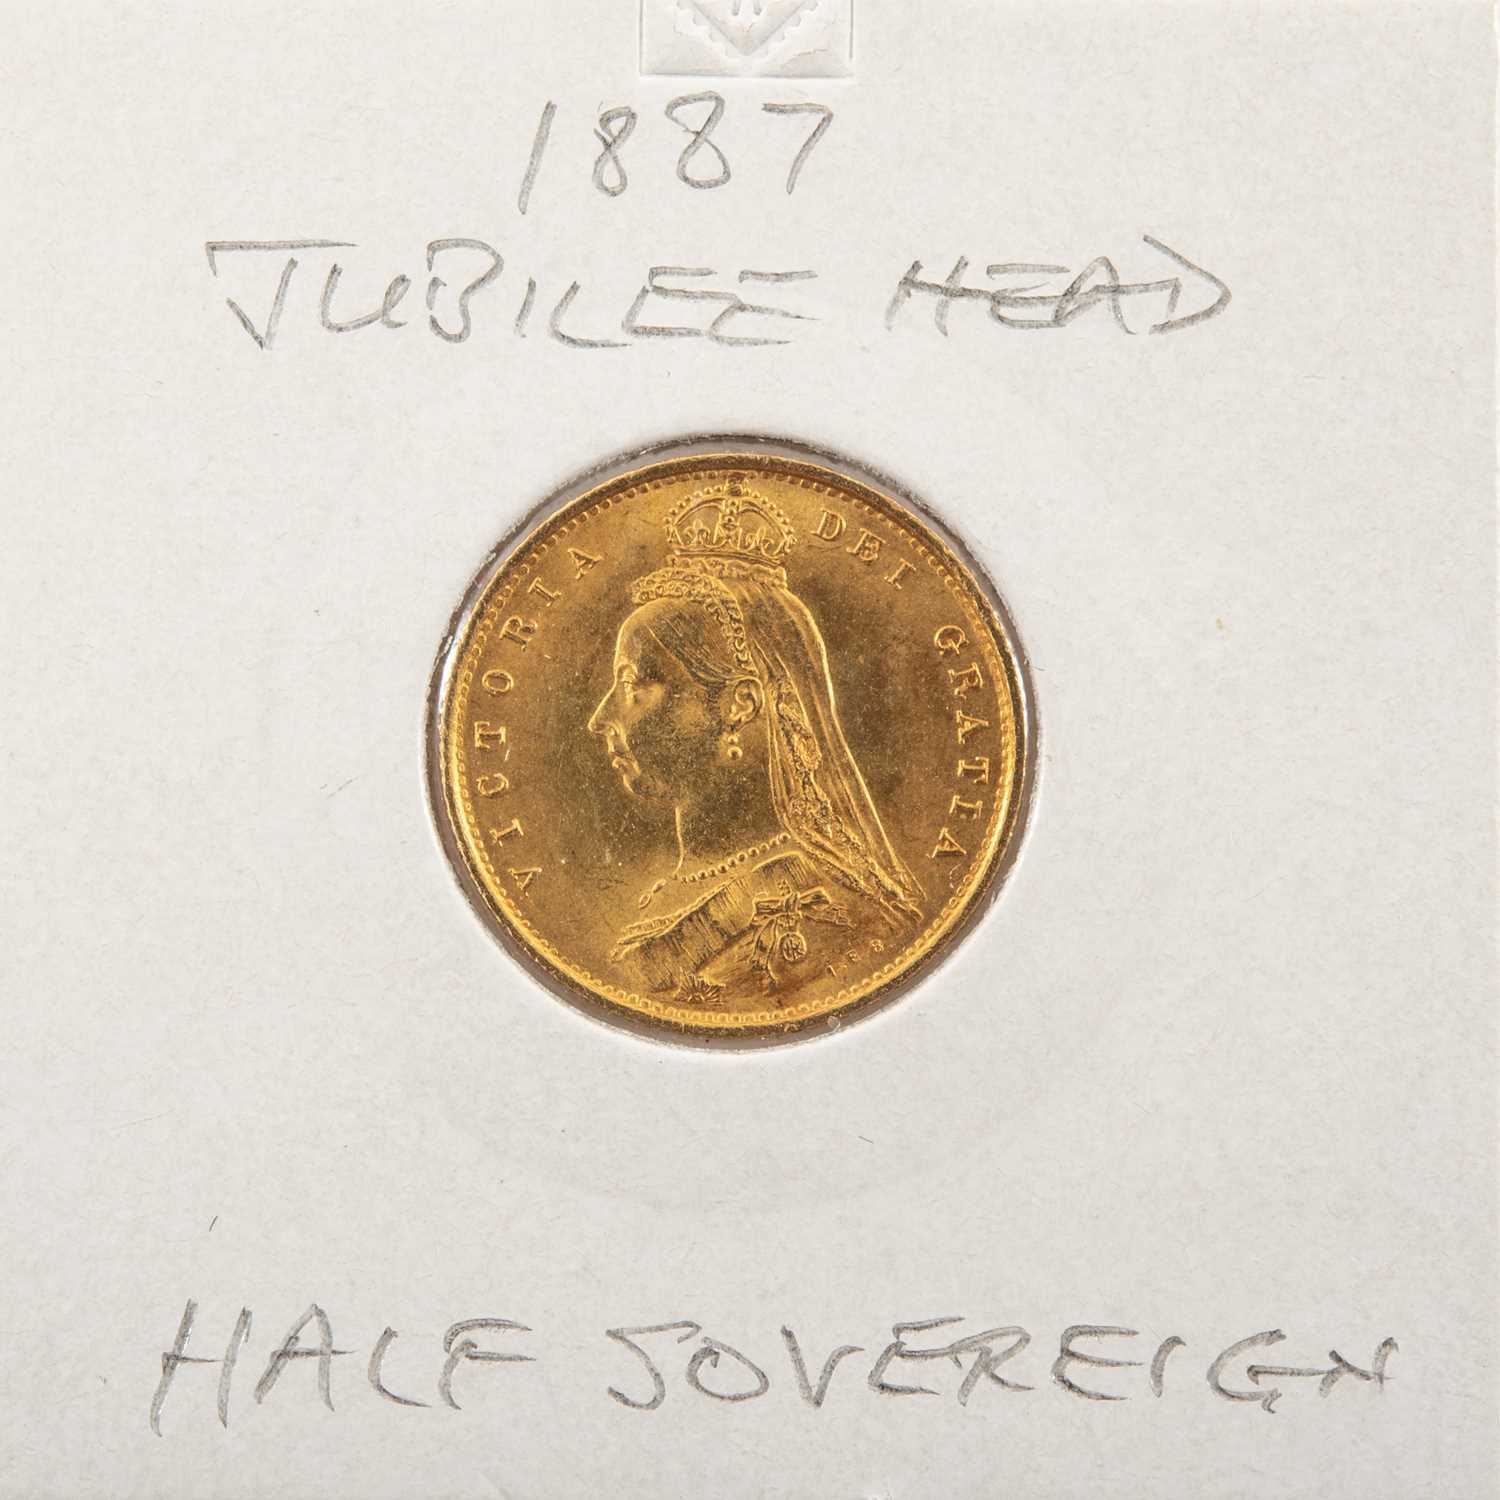 VICTORIAN GOLD HALF SOVEREIGN, 1887, Jubilee head, crowned and embellished shield-of-arms, in coin